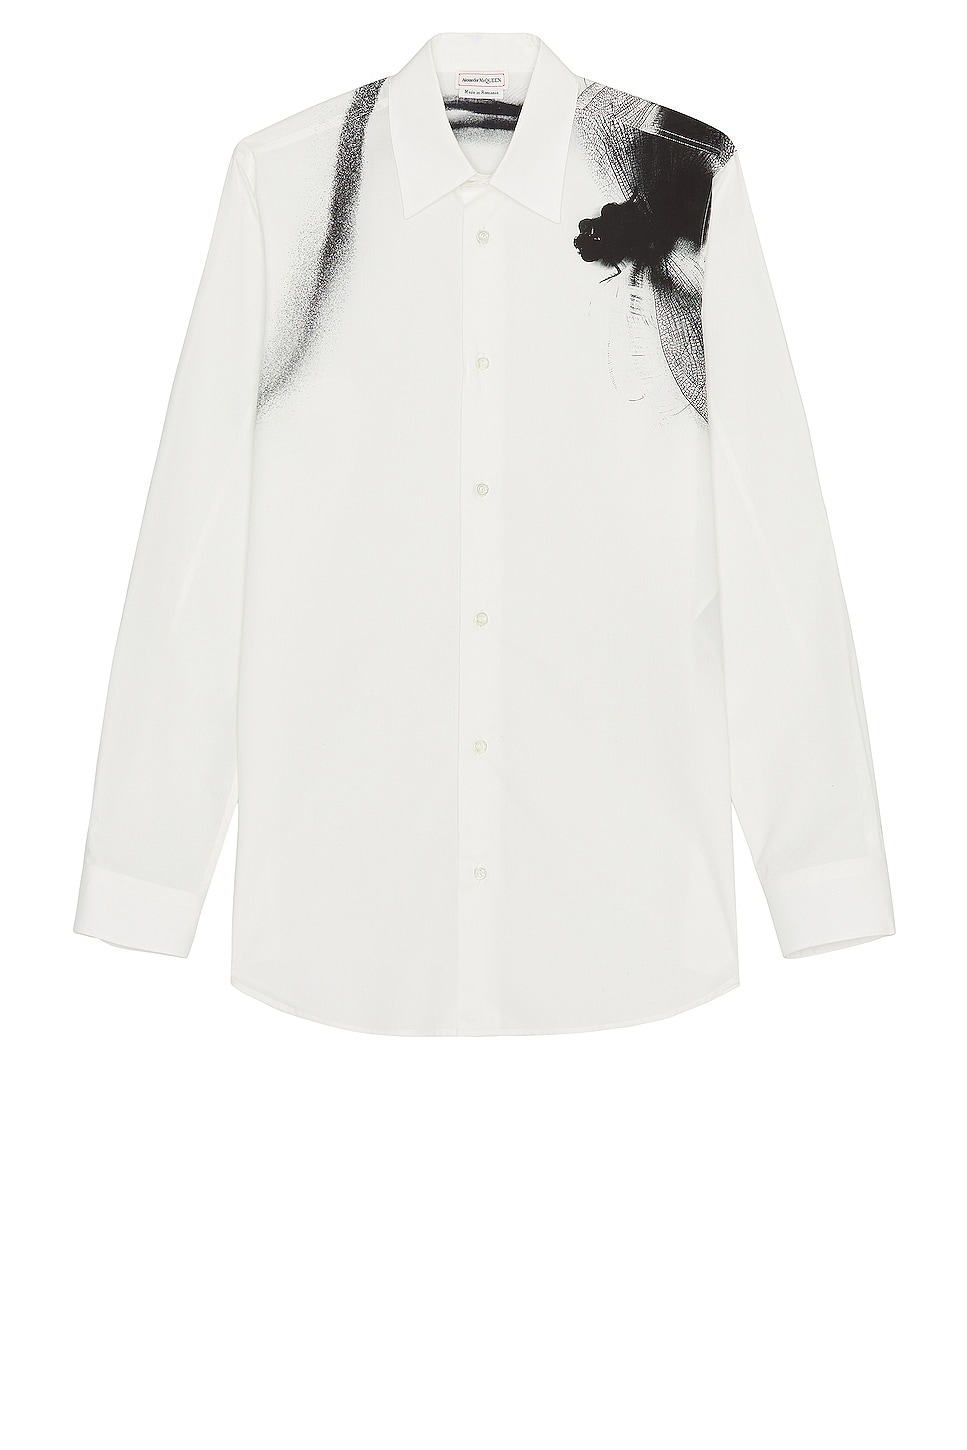 Image 1 of Alexander McQueen Dragonfly Printed Shirt in White & Black